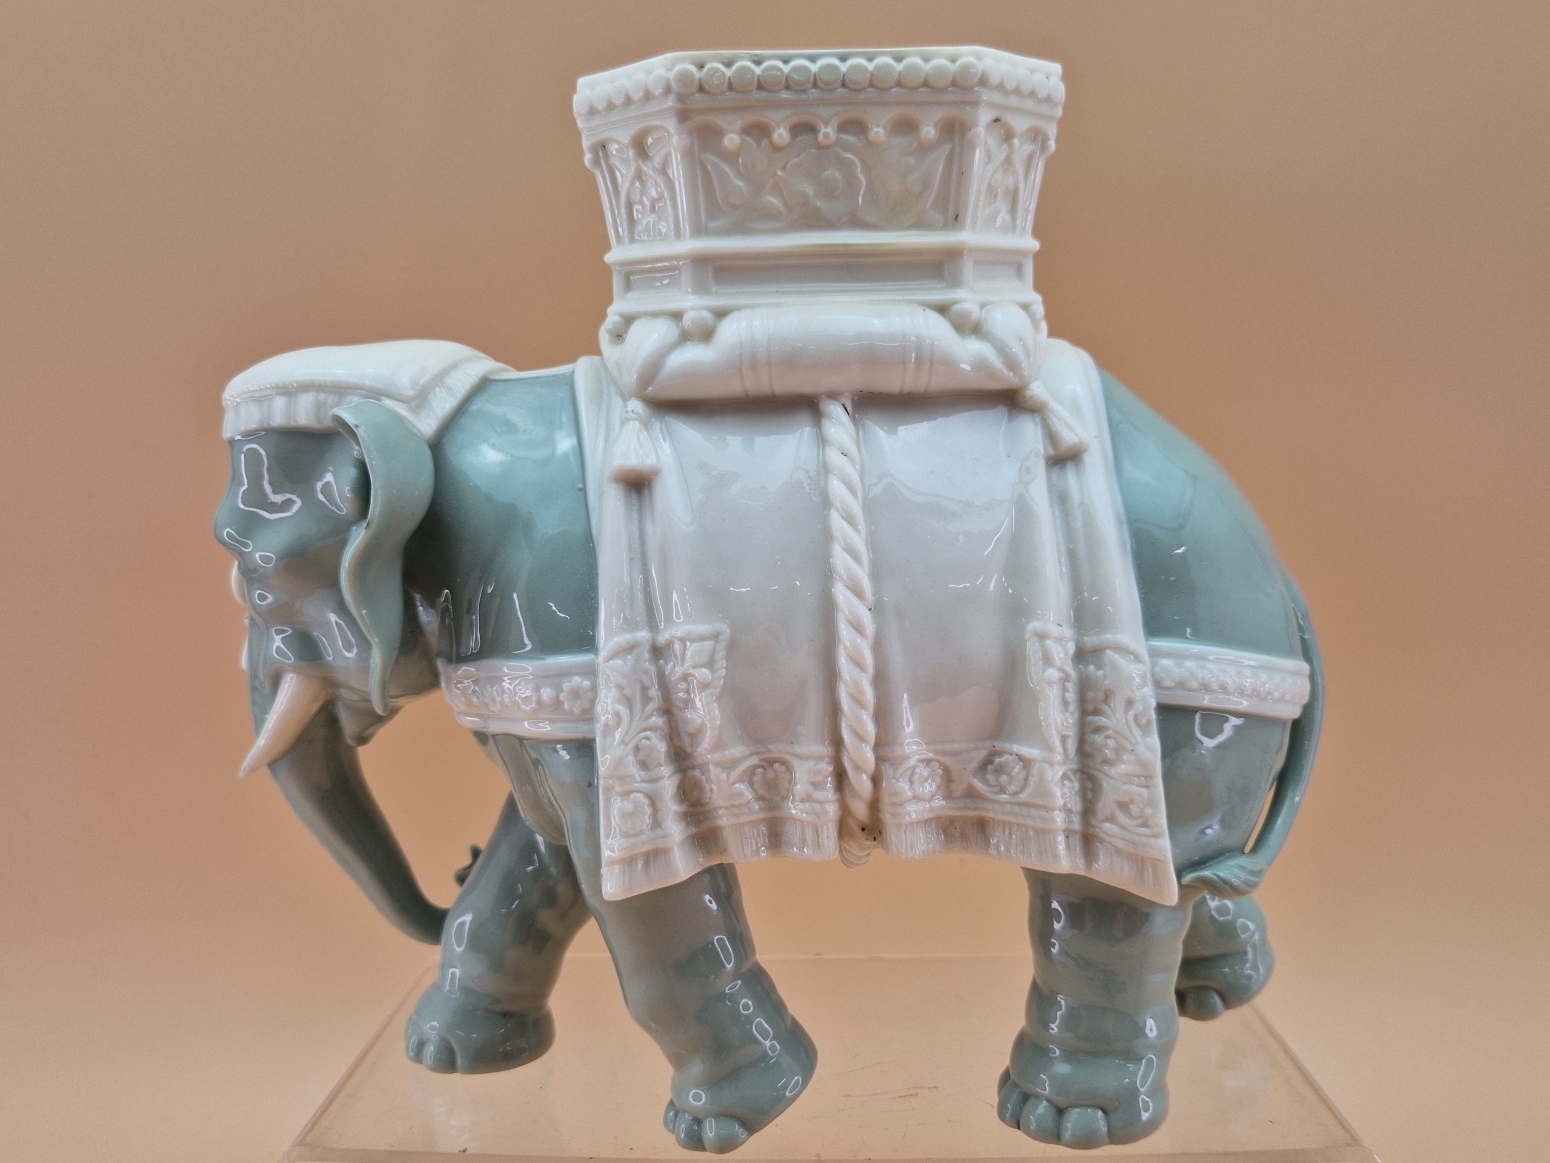 A ROYAL WORCESTER GLAZED PARIAN CELADON COLOURED ELEPHANT CAPARISSONED WITH A WHITE HOWDAH. H - Image 2 of 4